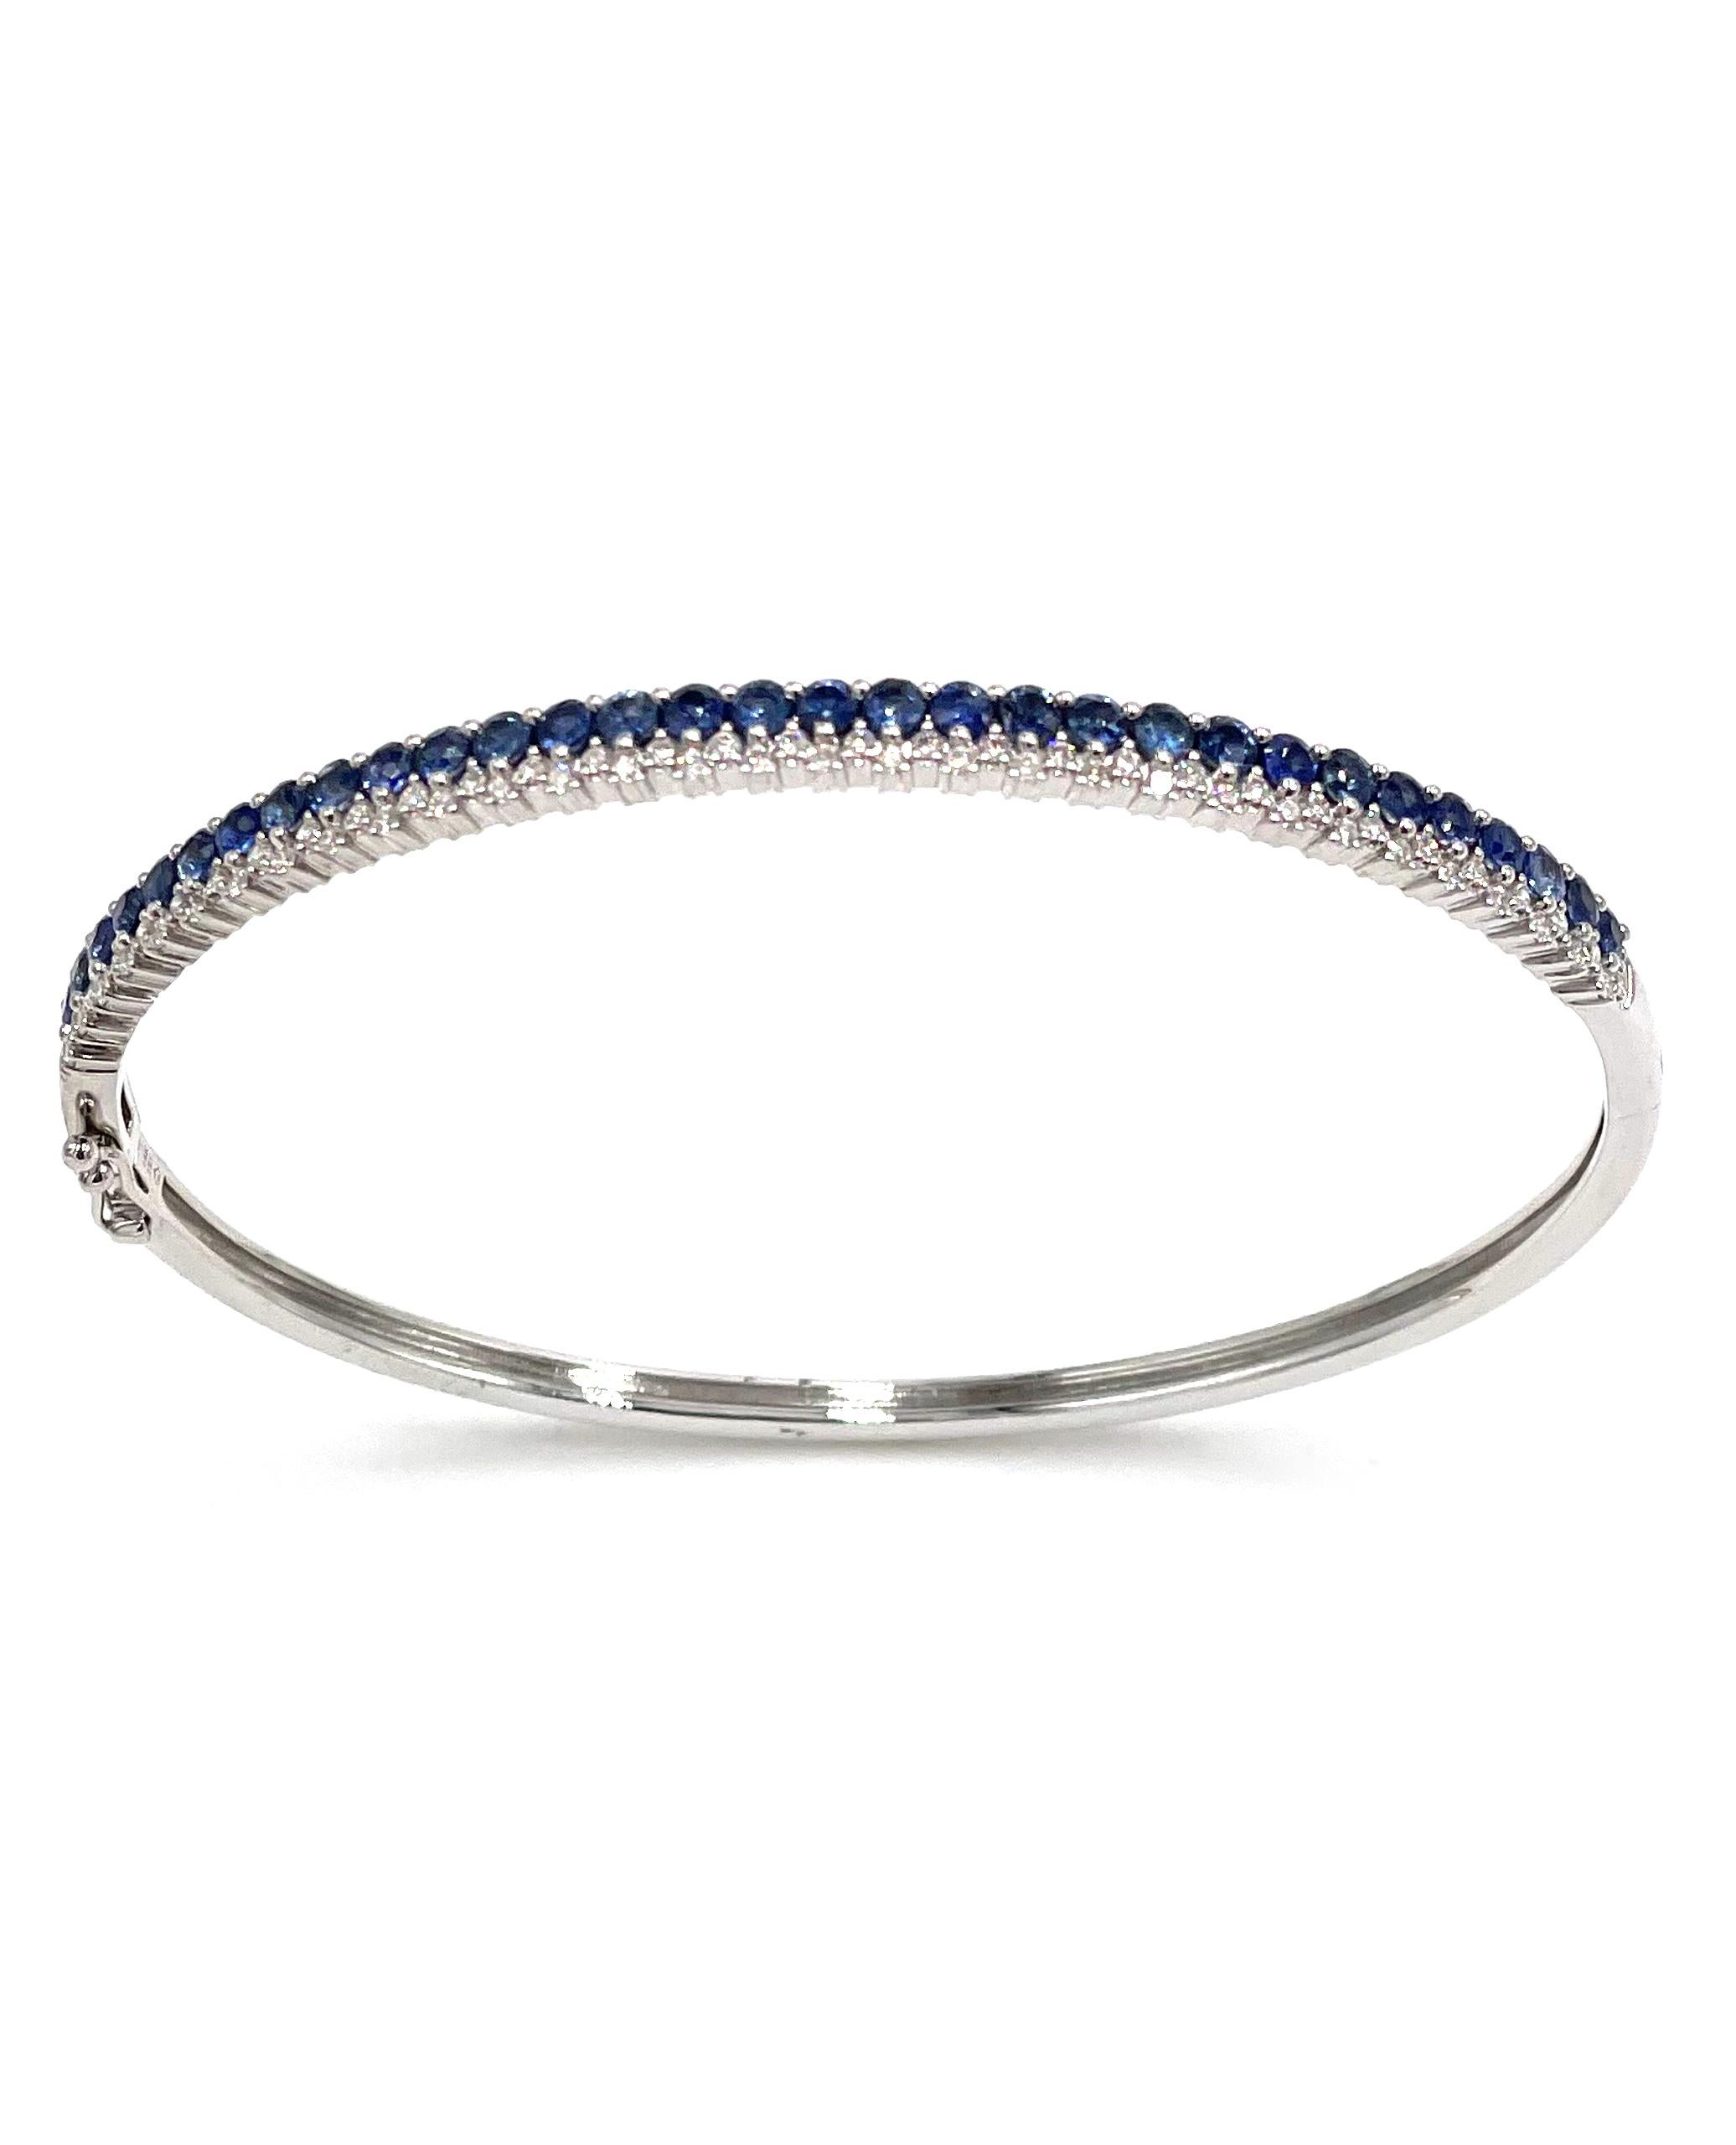 14K white gold bangle with 63 round brilliant-cut diamonds 0.46 carat and 31 round blue sapphires 2.18 carats.

* Diamonds are H color, SI clarity
* Figure 8 safety lock